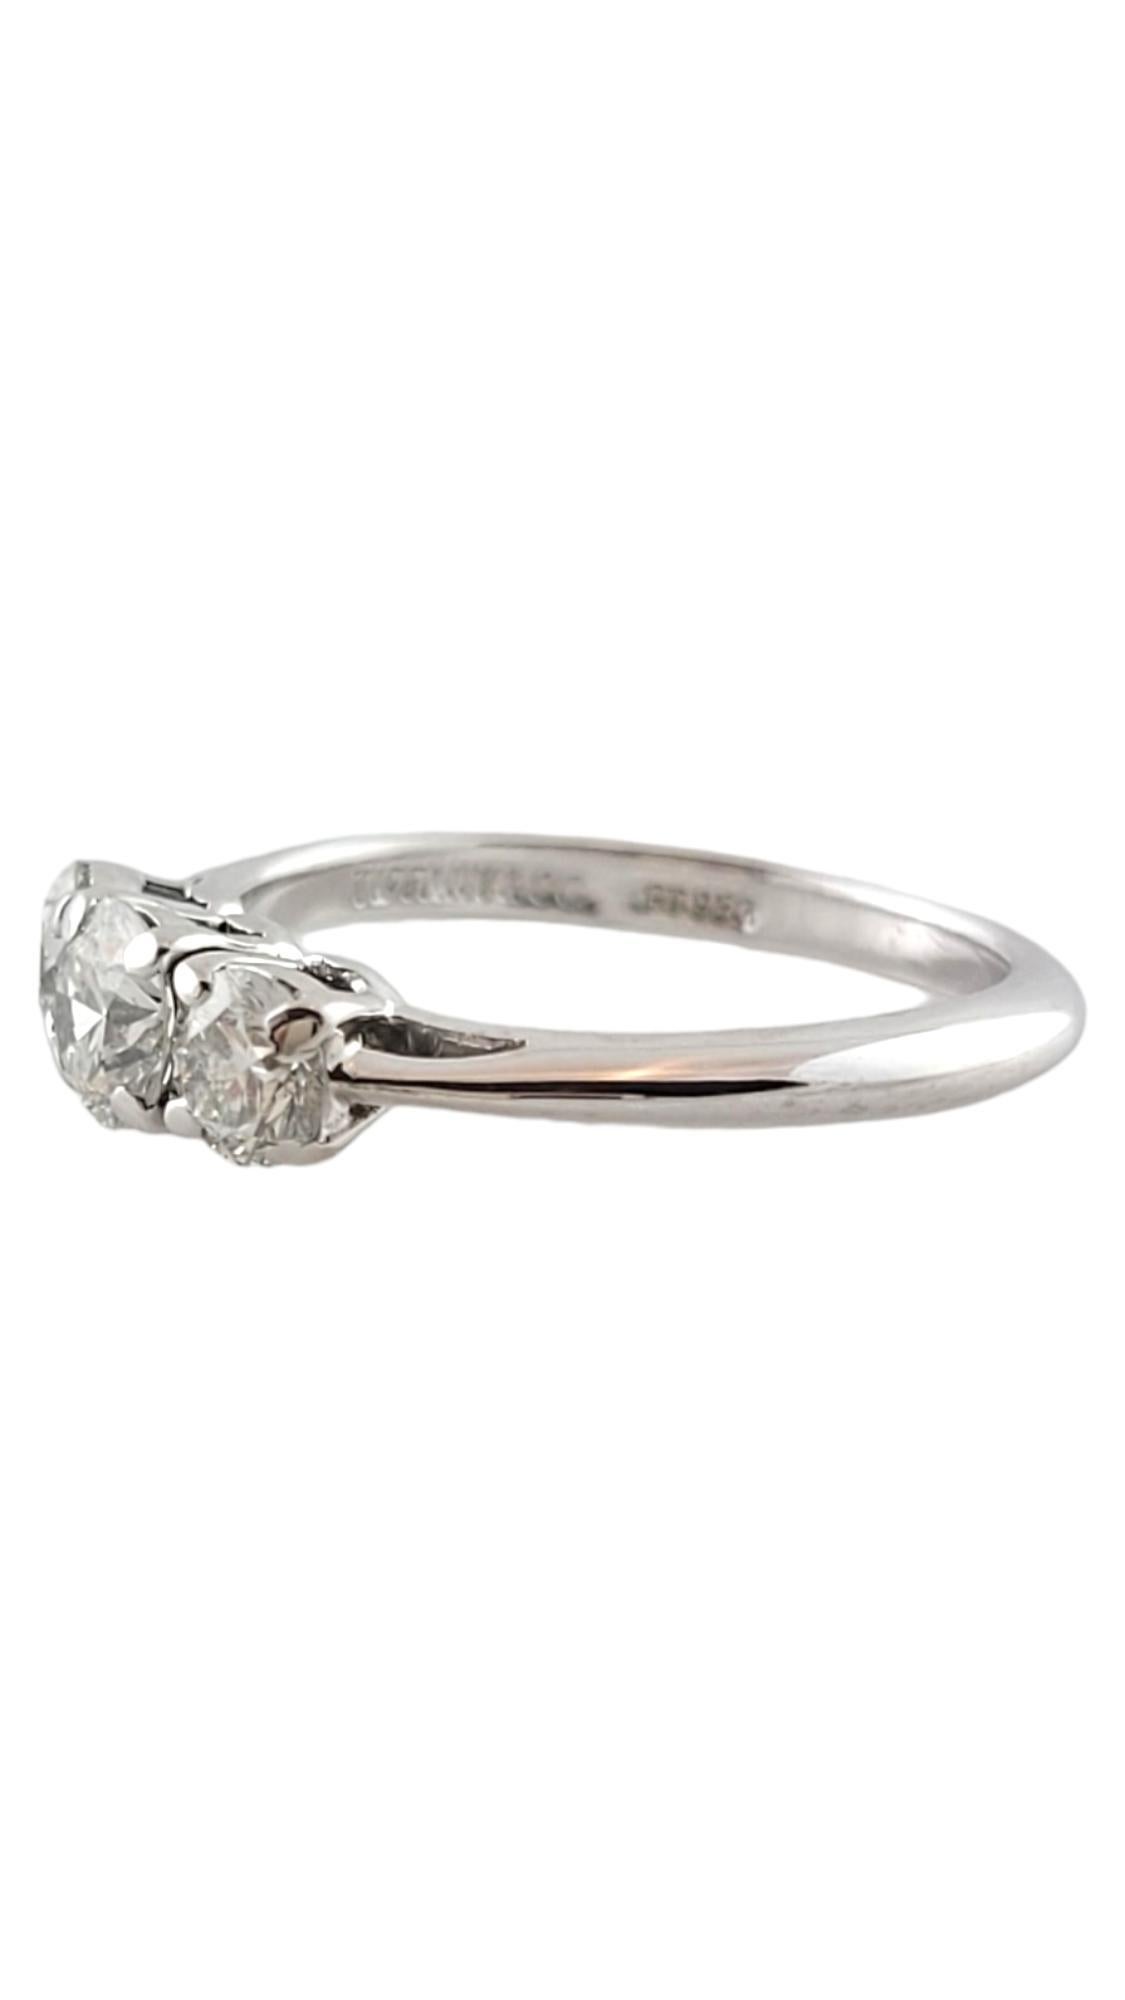 Tiffany & Co. Platinum 3 Round Brilliant Diamond Engagement Ring .75cts

This beautiful platinum diamond engagement ring is set with 3 round brilliant diamonds.

Center diamond is .35cts  VS1 clarity, H color

Two sides diamonds are .20cts each VS1